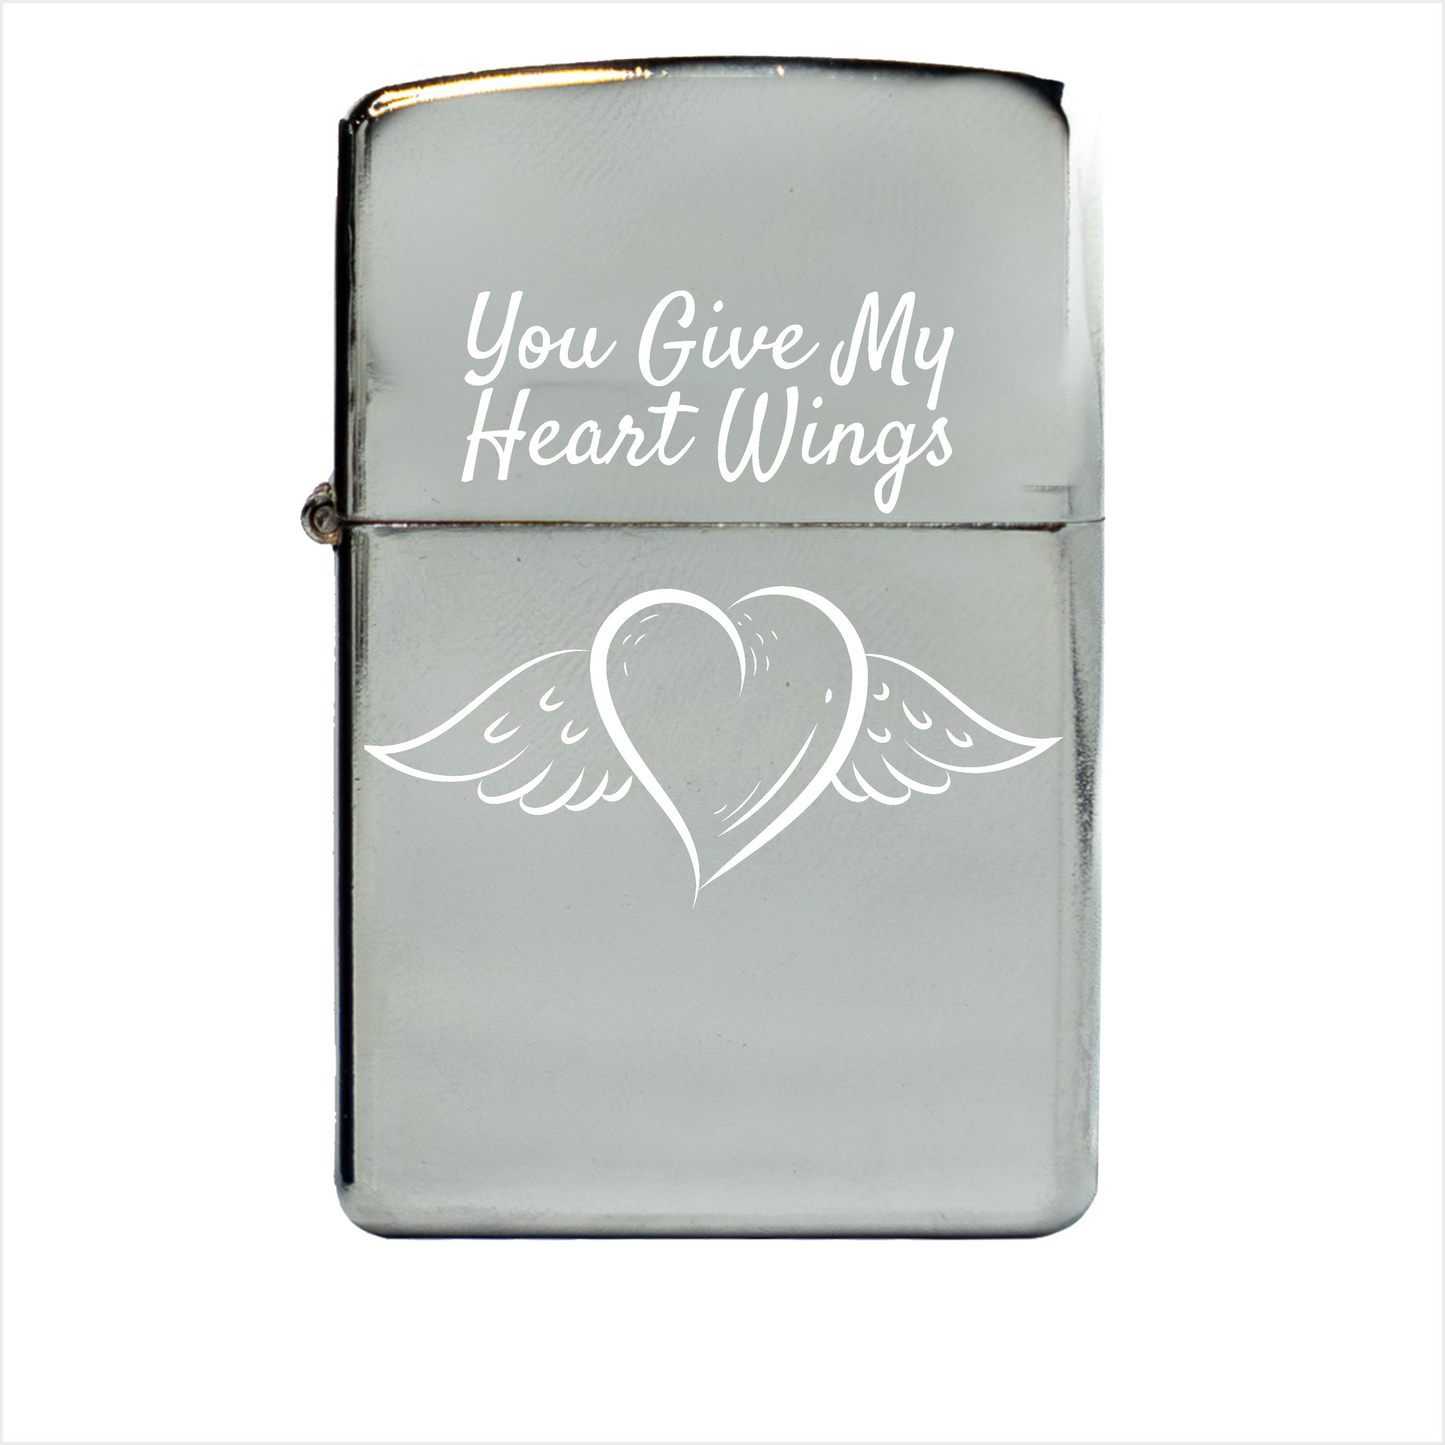 Lighter Lovers. Quality Customized Lighters "You Give My Heart Wings" Design, Available In Black White And Polished Metal